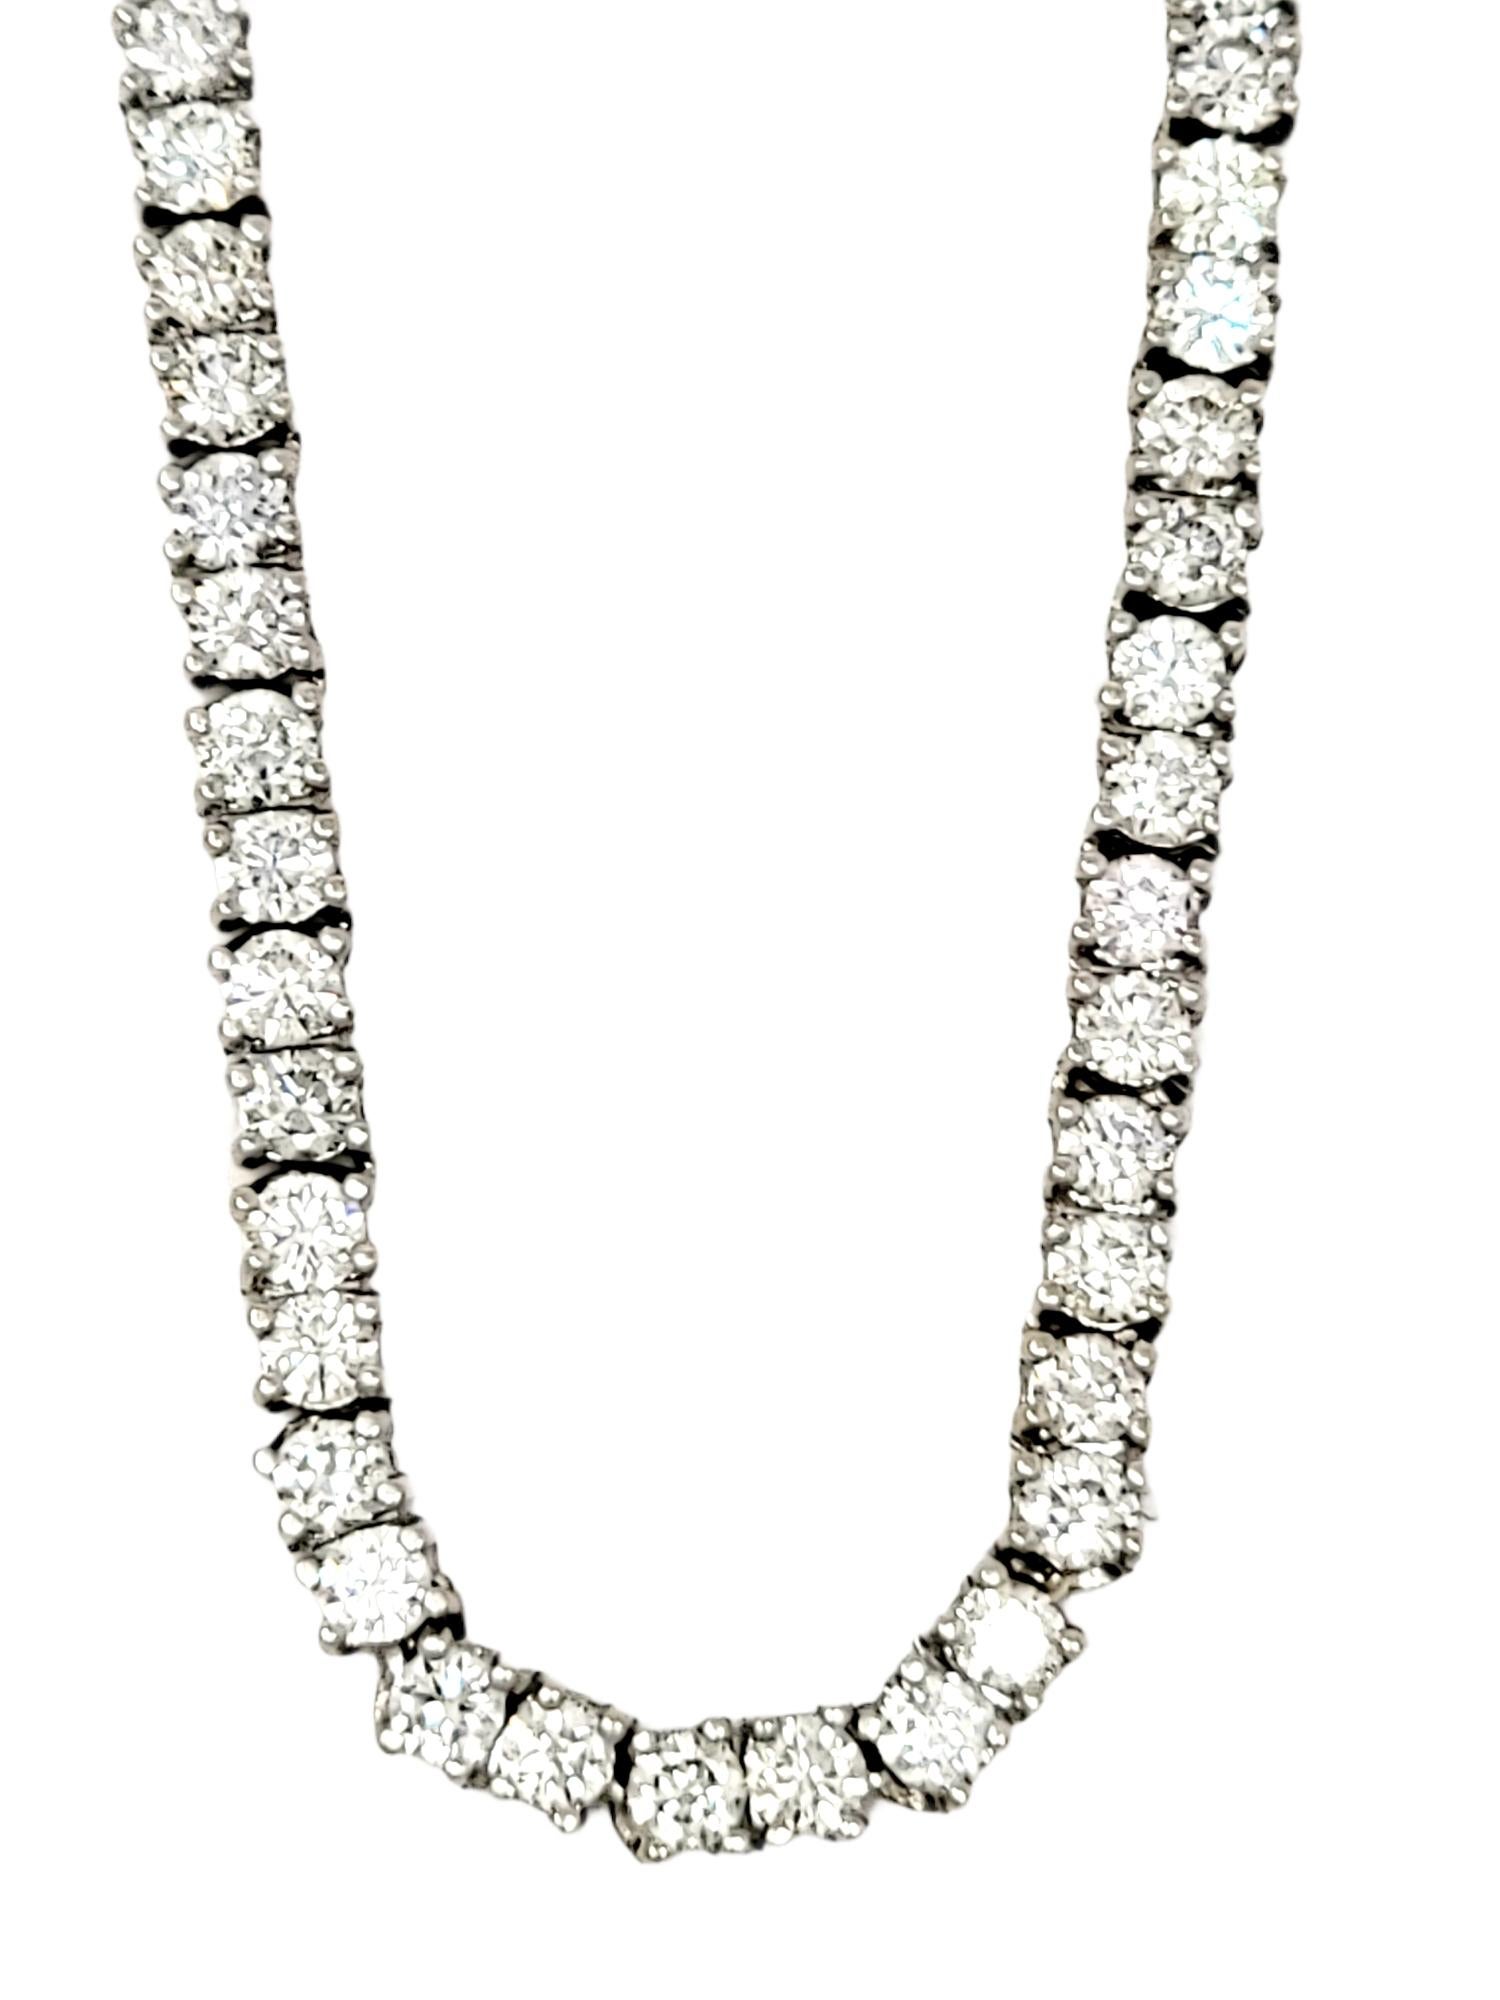 This is an absolutely breathtaking diamond tennis necklace that will stand the test of time. The elegant white gold setting paired with the timeless round diamonds makes this piece a true classic that will never go out of style. This gorgeous